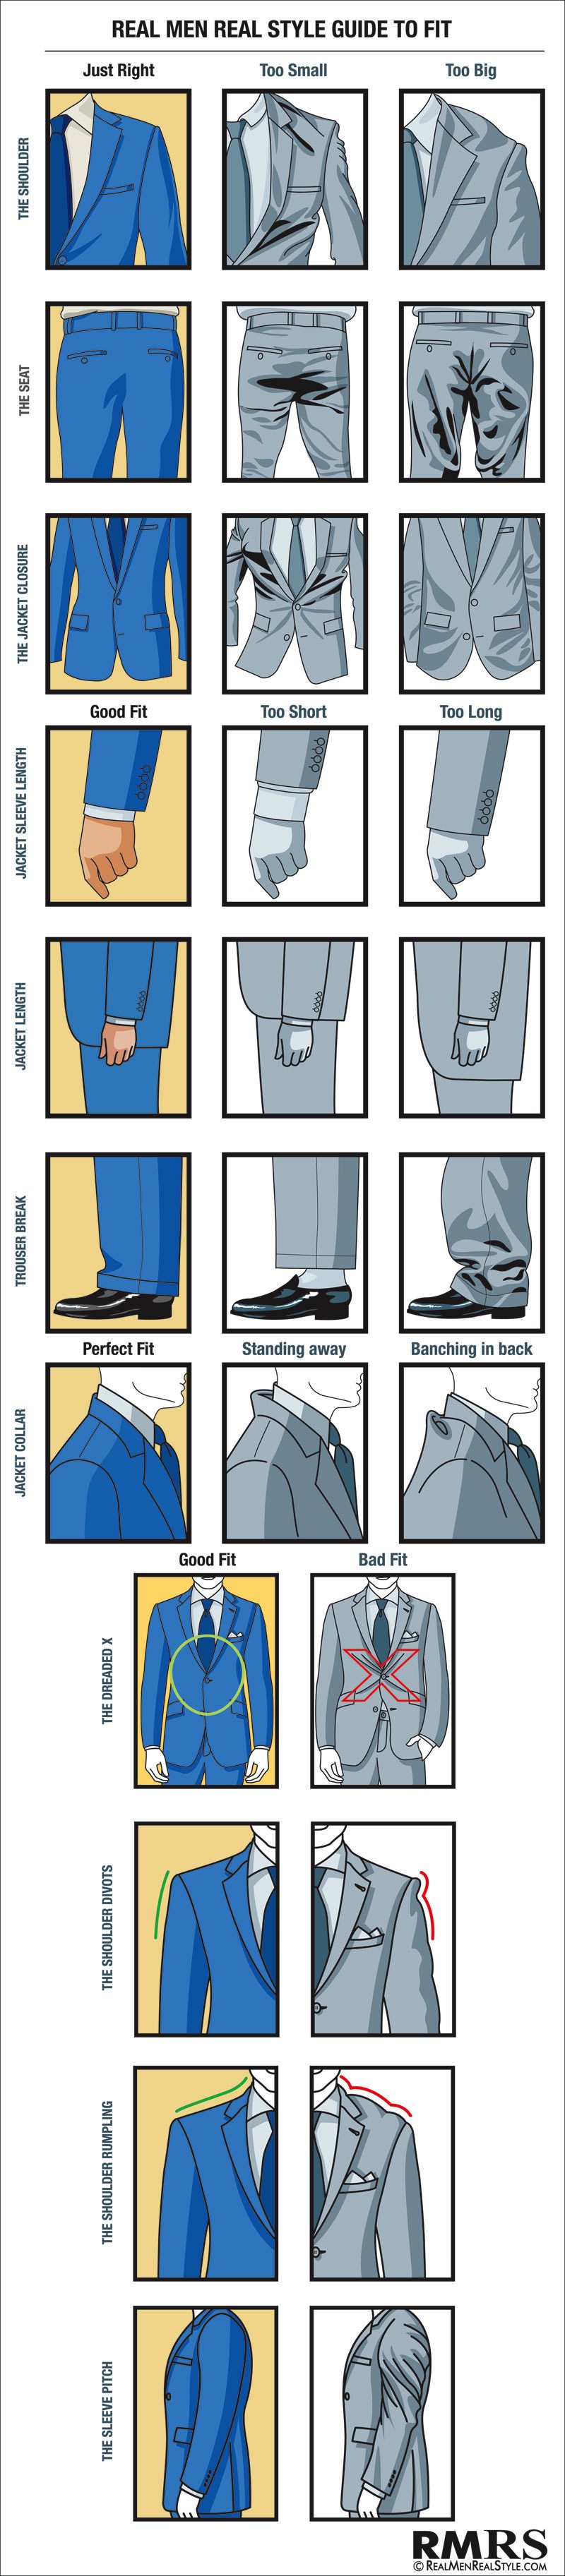 original, a guide to getting the perfect fit for your suit